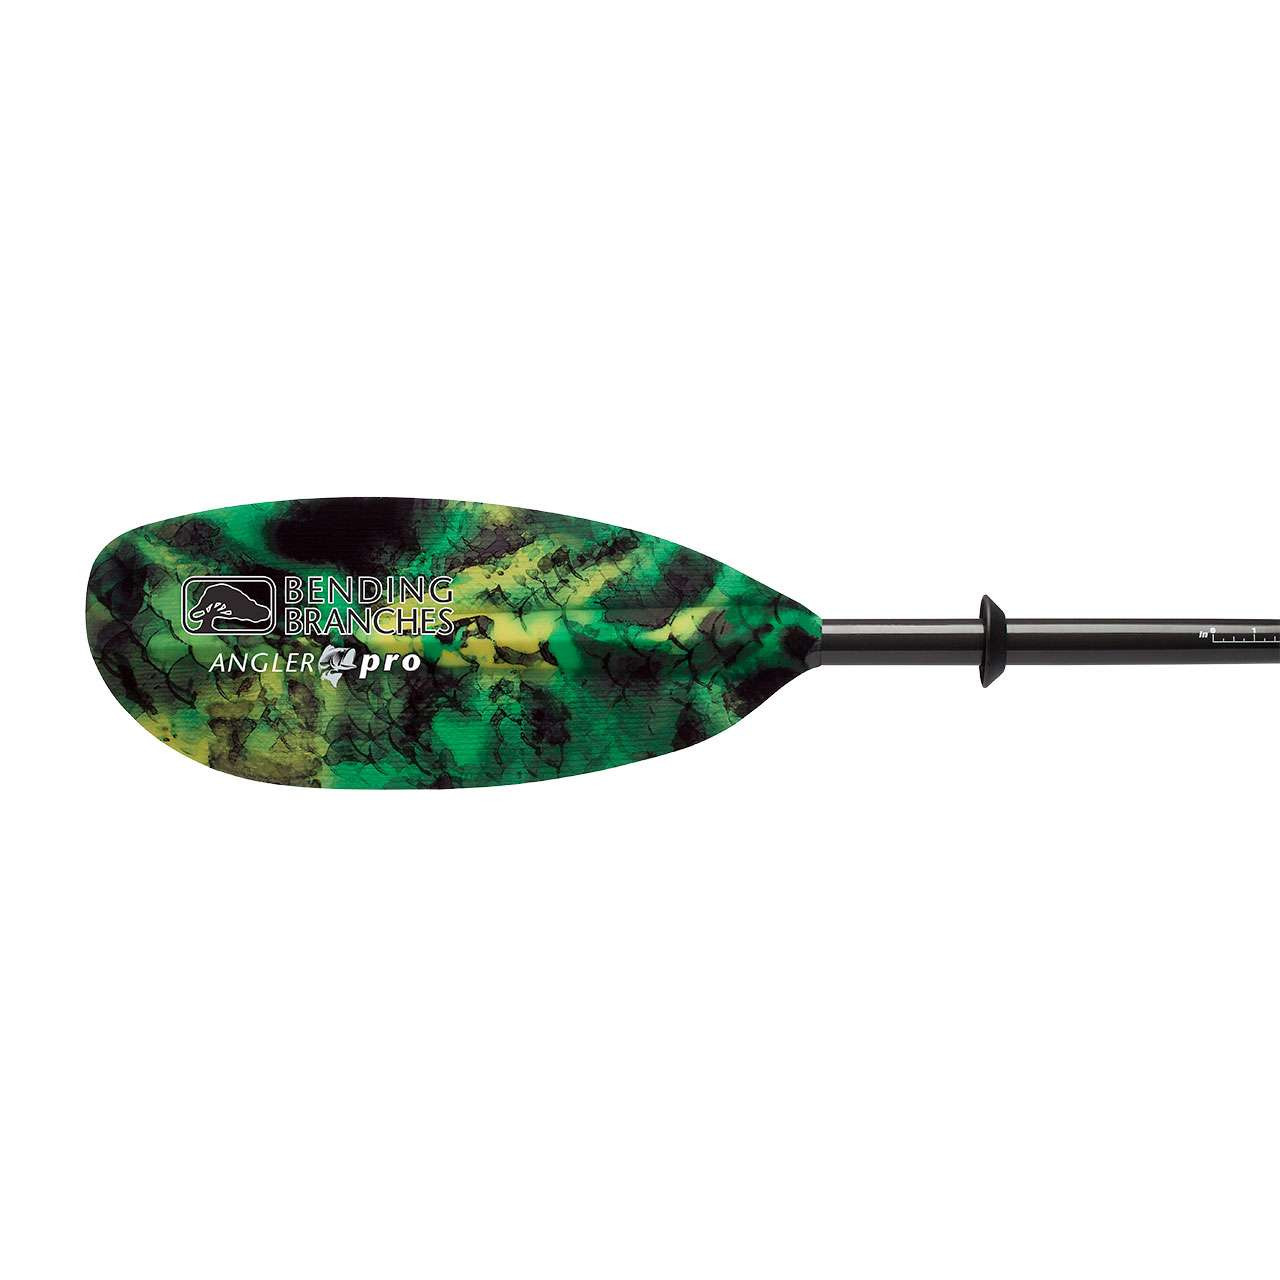 Bending Branches Angler Pro Paddle - Oregon Paddle Sports